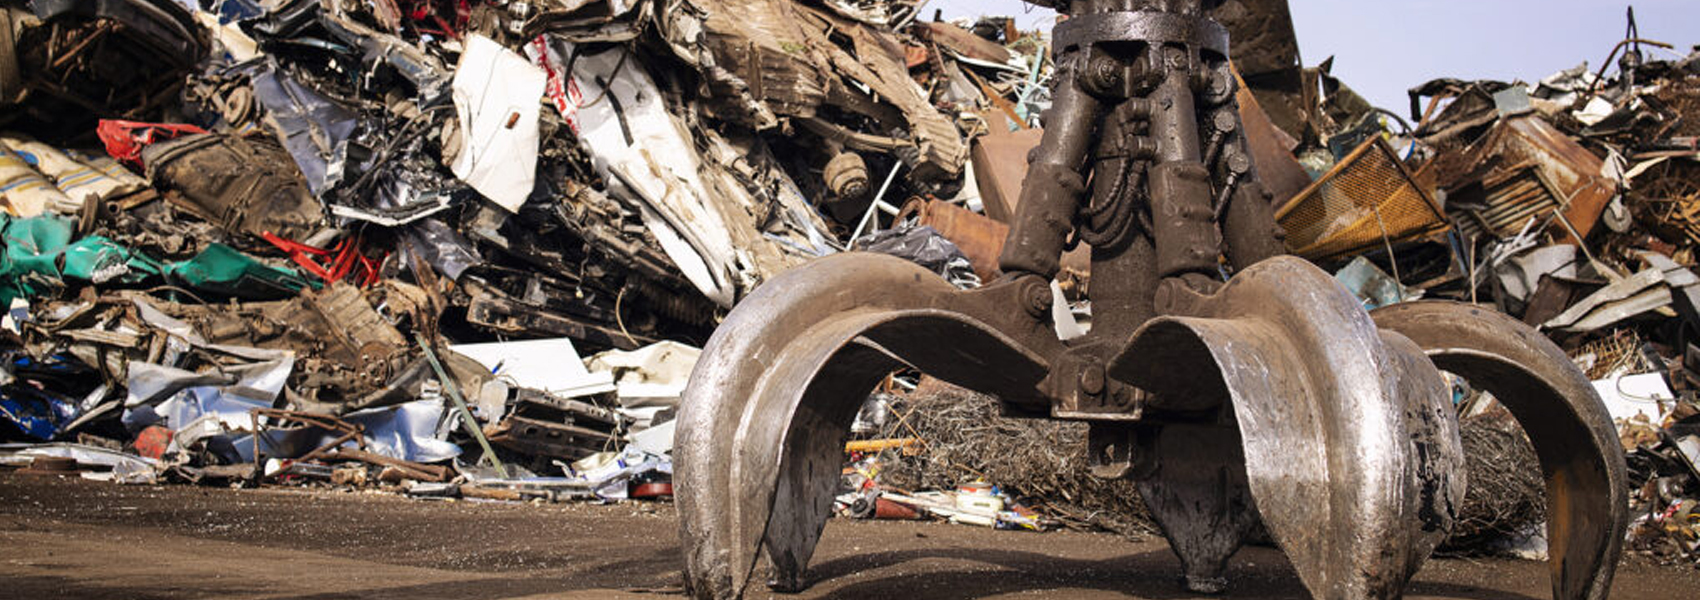 Spring Cleaning? – Here’s What to Do With Scrap Metal